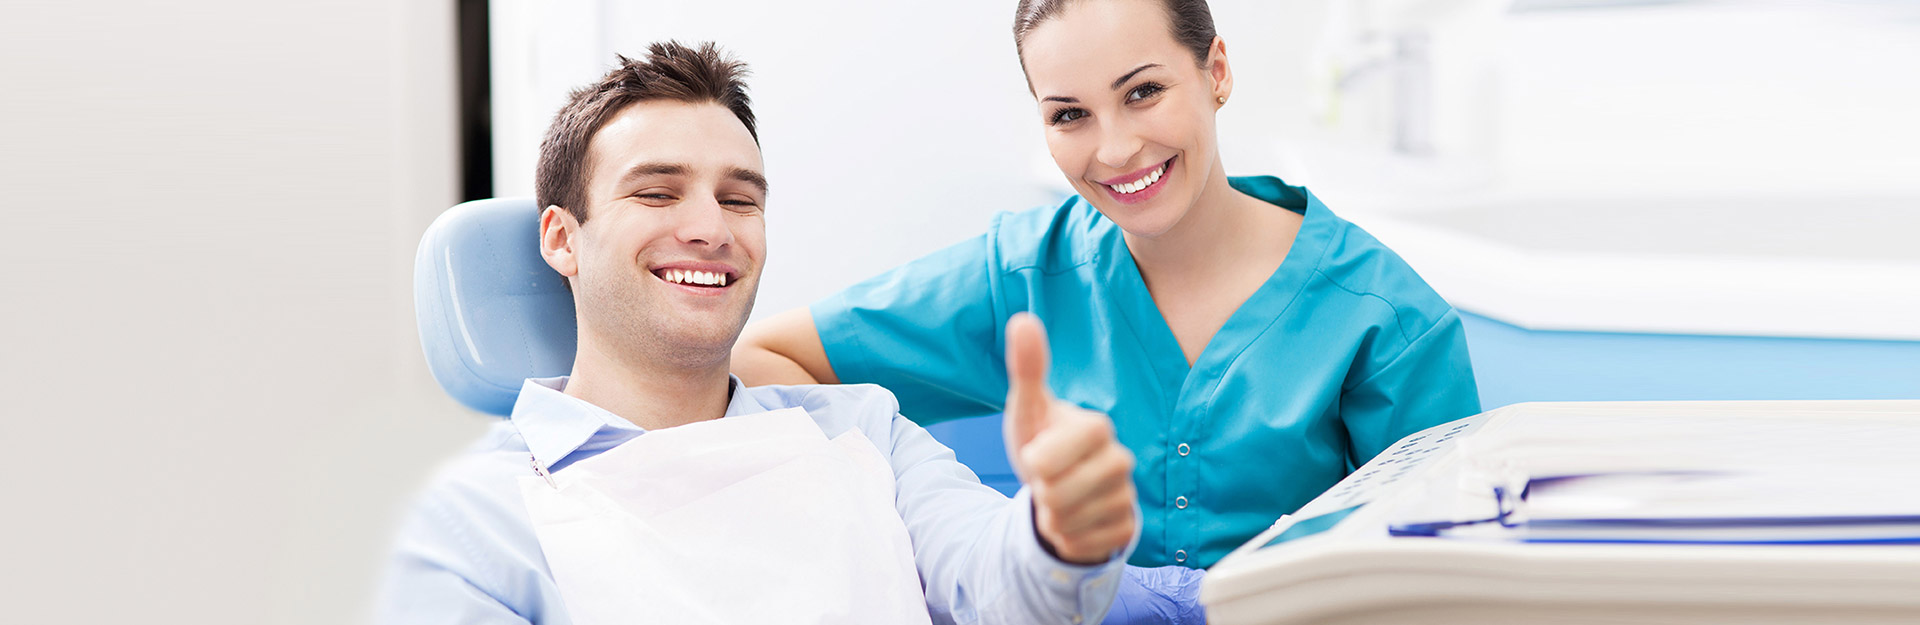 Why Do I Need an Endodontist for a Root Canal treatment in Encinitas?